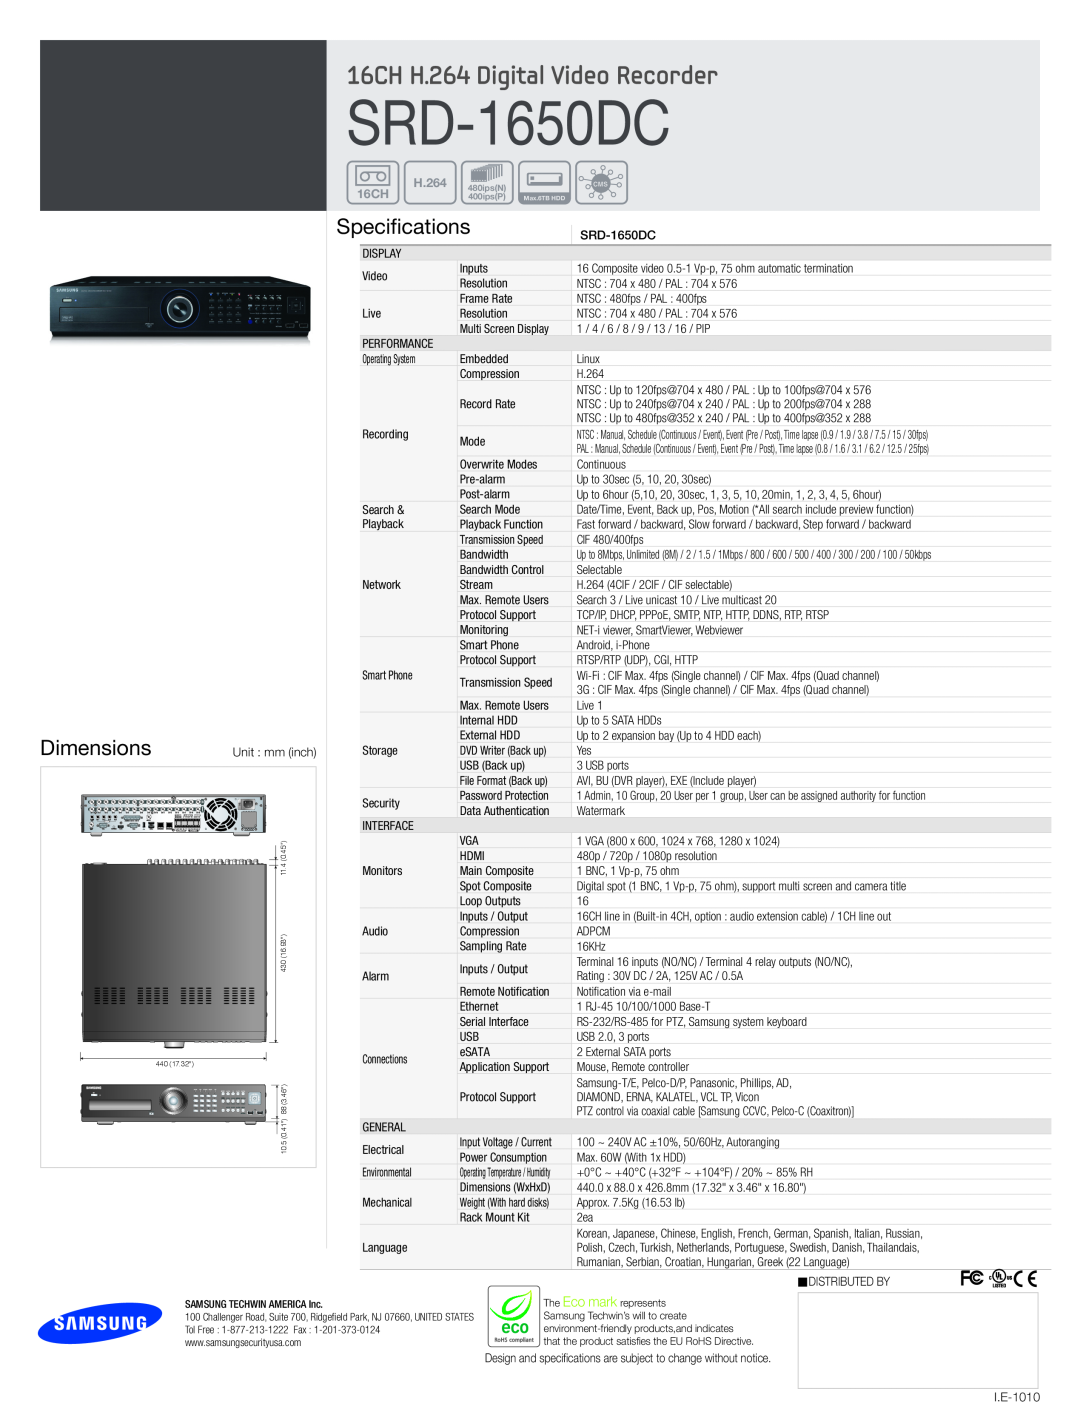 Samsung manual SRD-1650DC, 16CH H.264 Digital Video Recorder, Dimensions, Specifications 